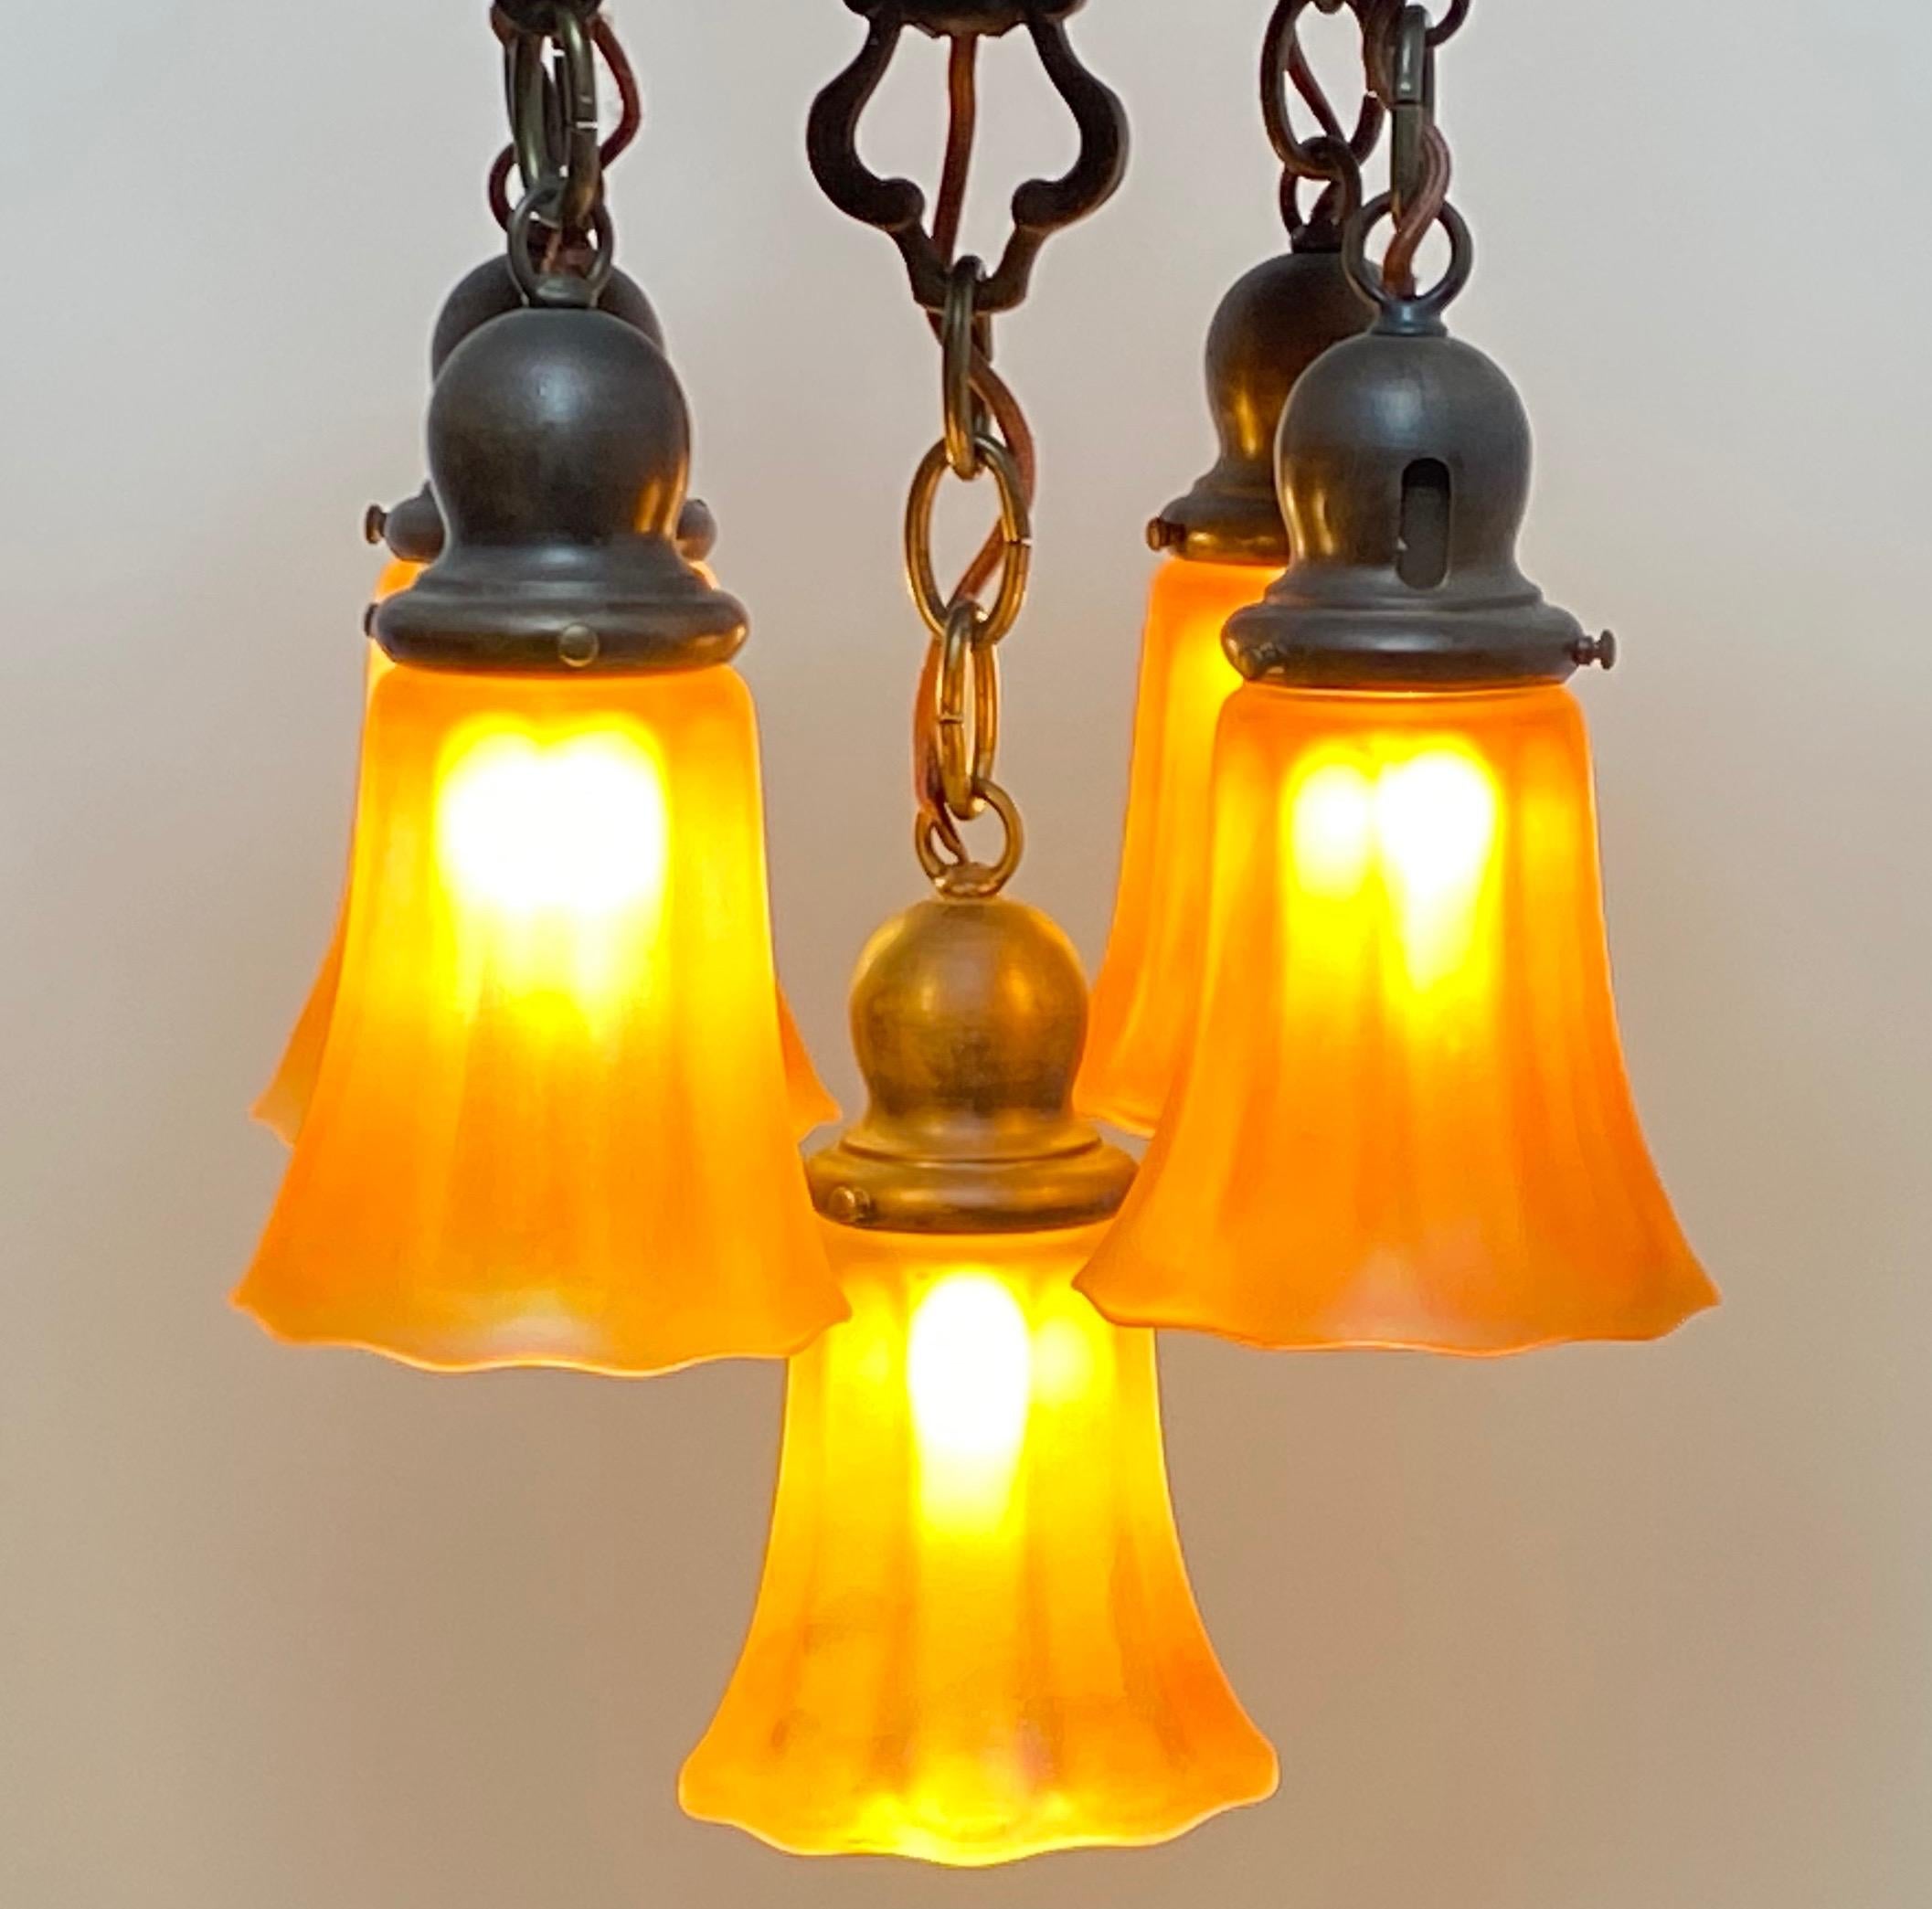 20th Century Antique Bronze and Art Glass Light Fixture, American, circa 1920 For Sale